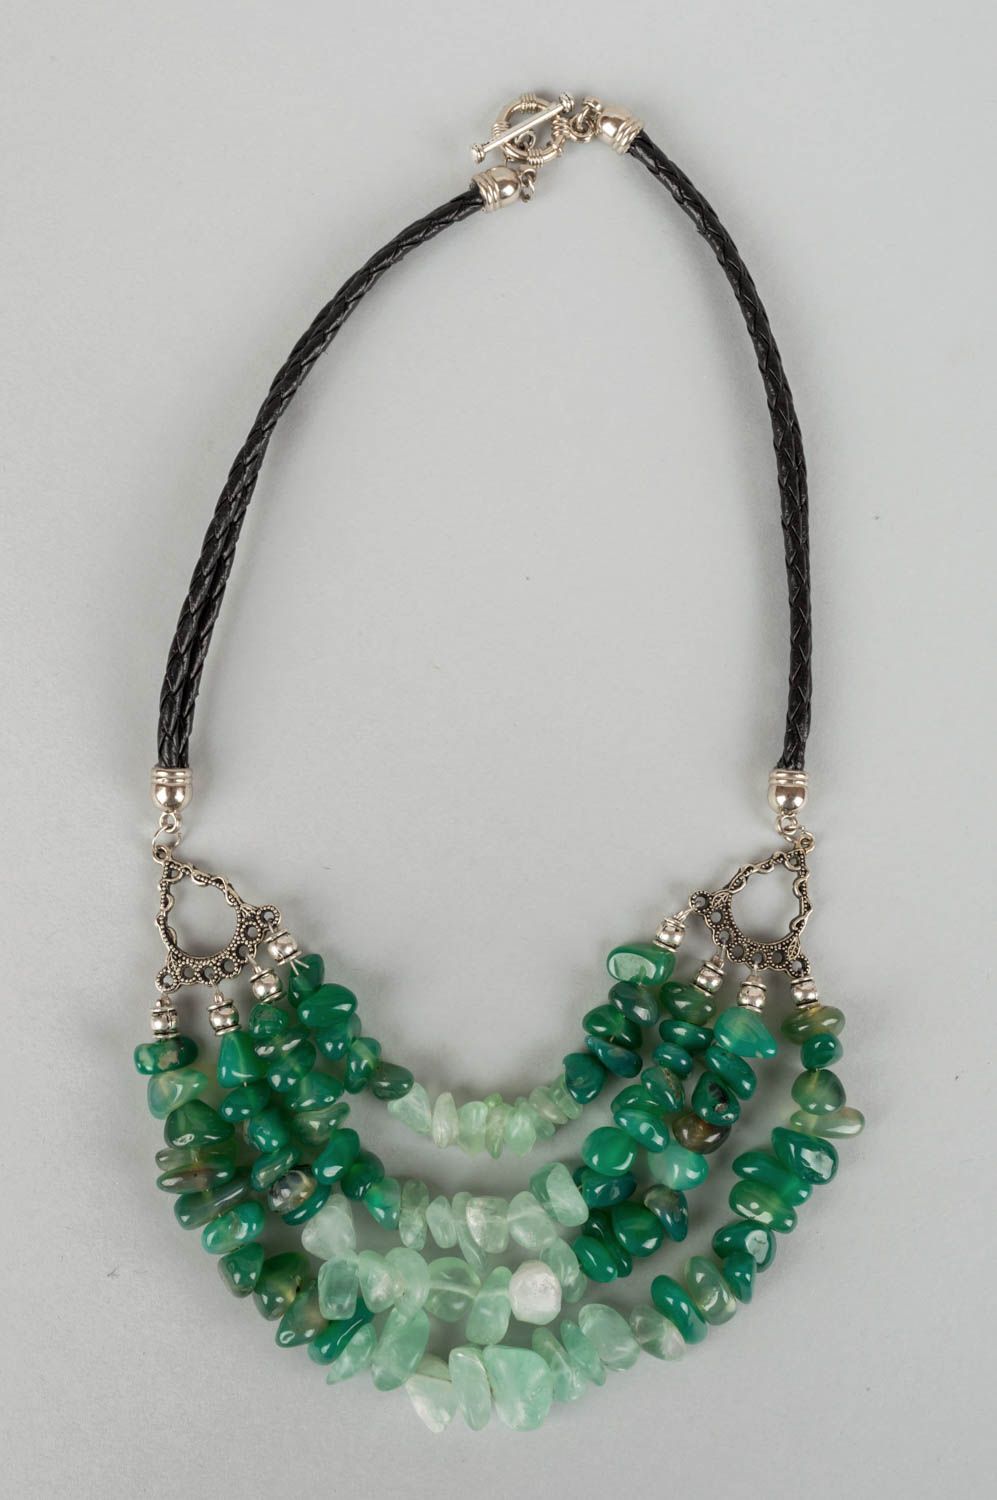 Handmade massive multi row necklace with latten elements and green agate beads photo 2